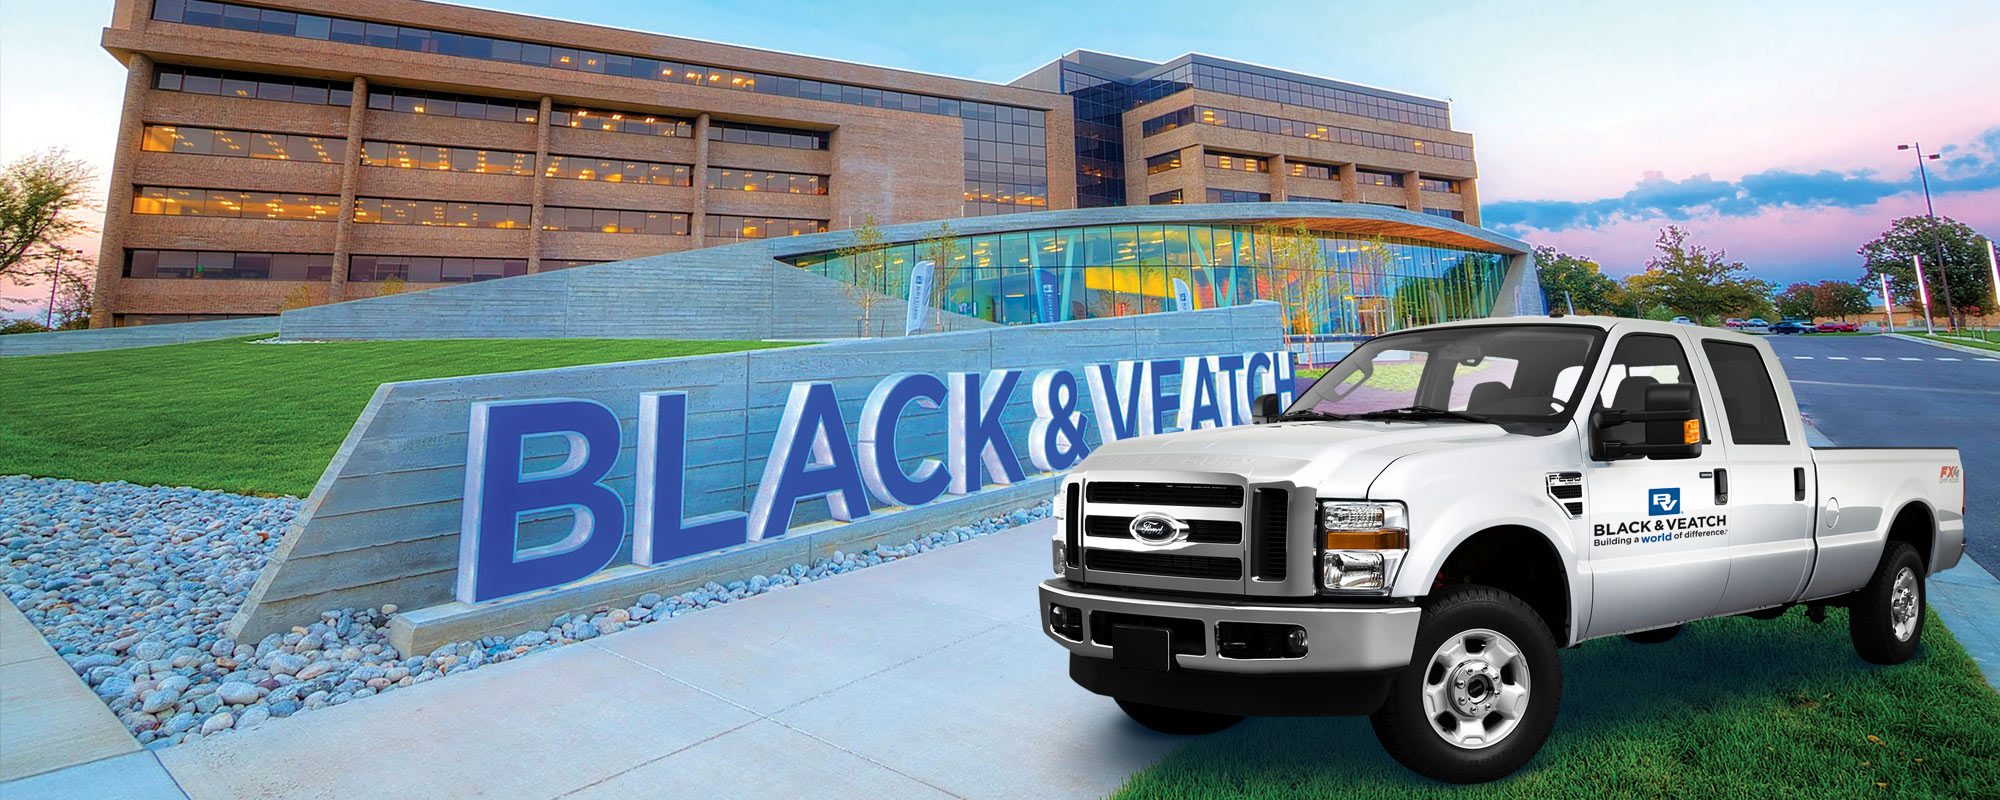 Grey vehicle in front of Black & Veatch sign